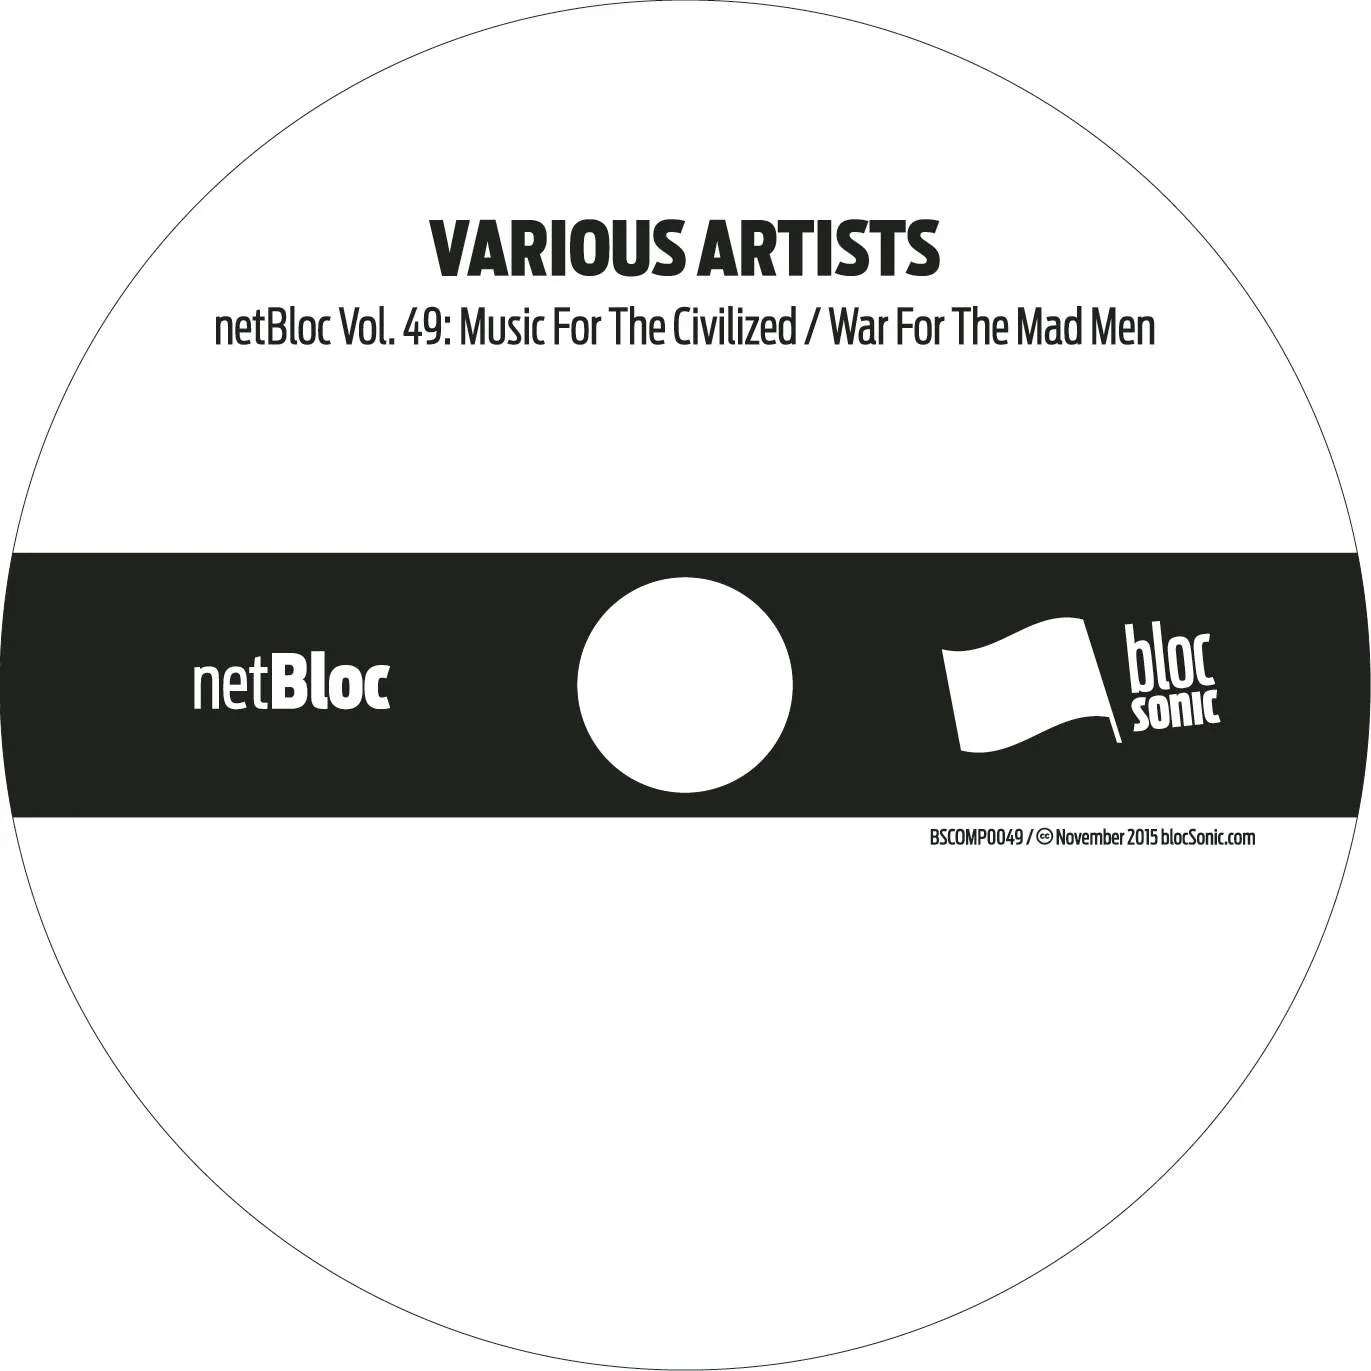 Album disc for “netBloc Vol. 49: Music For The Civilized / War For The Mad Men” by Various Artists